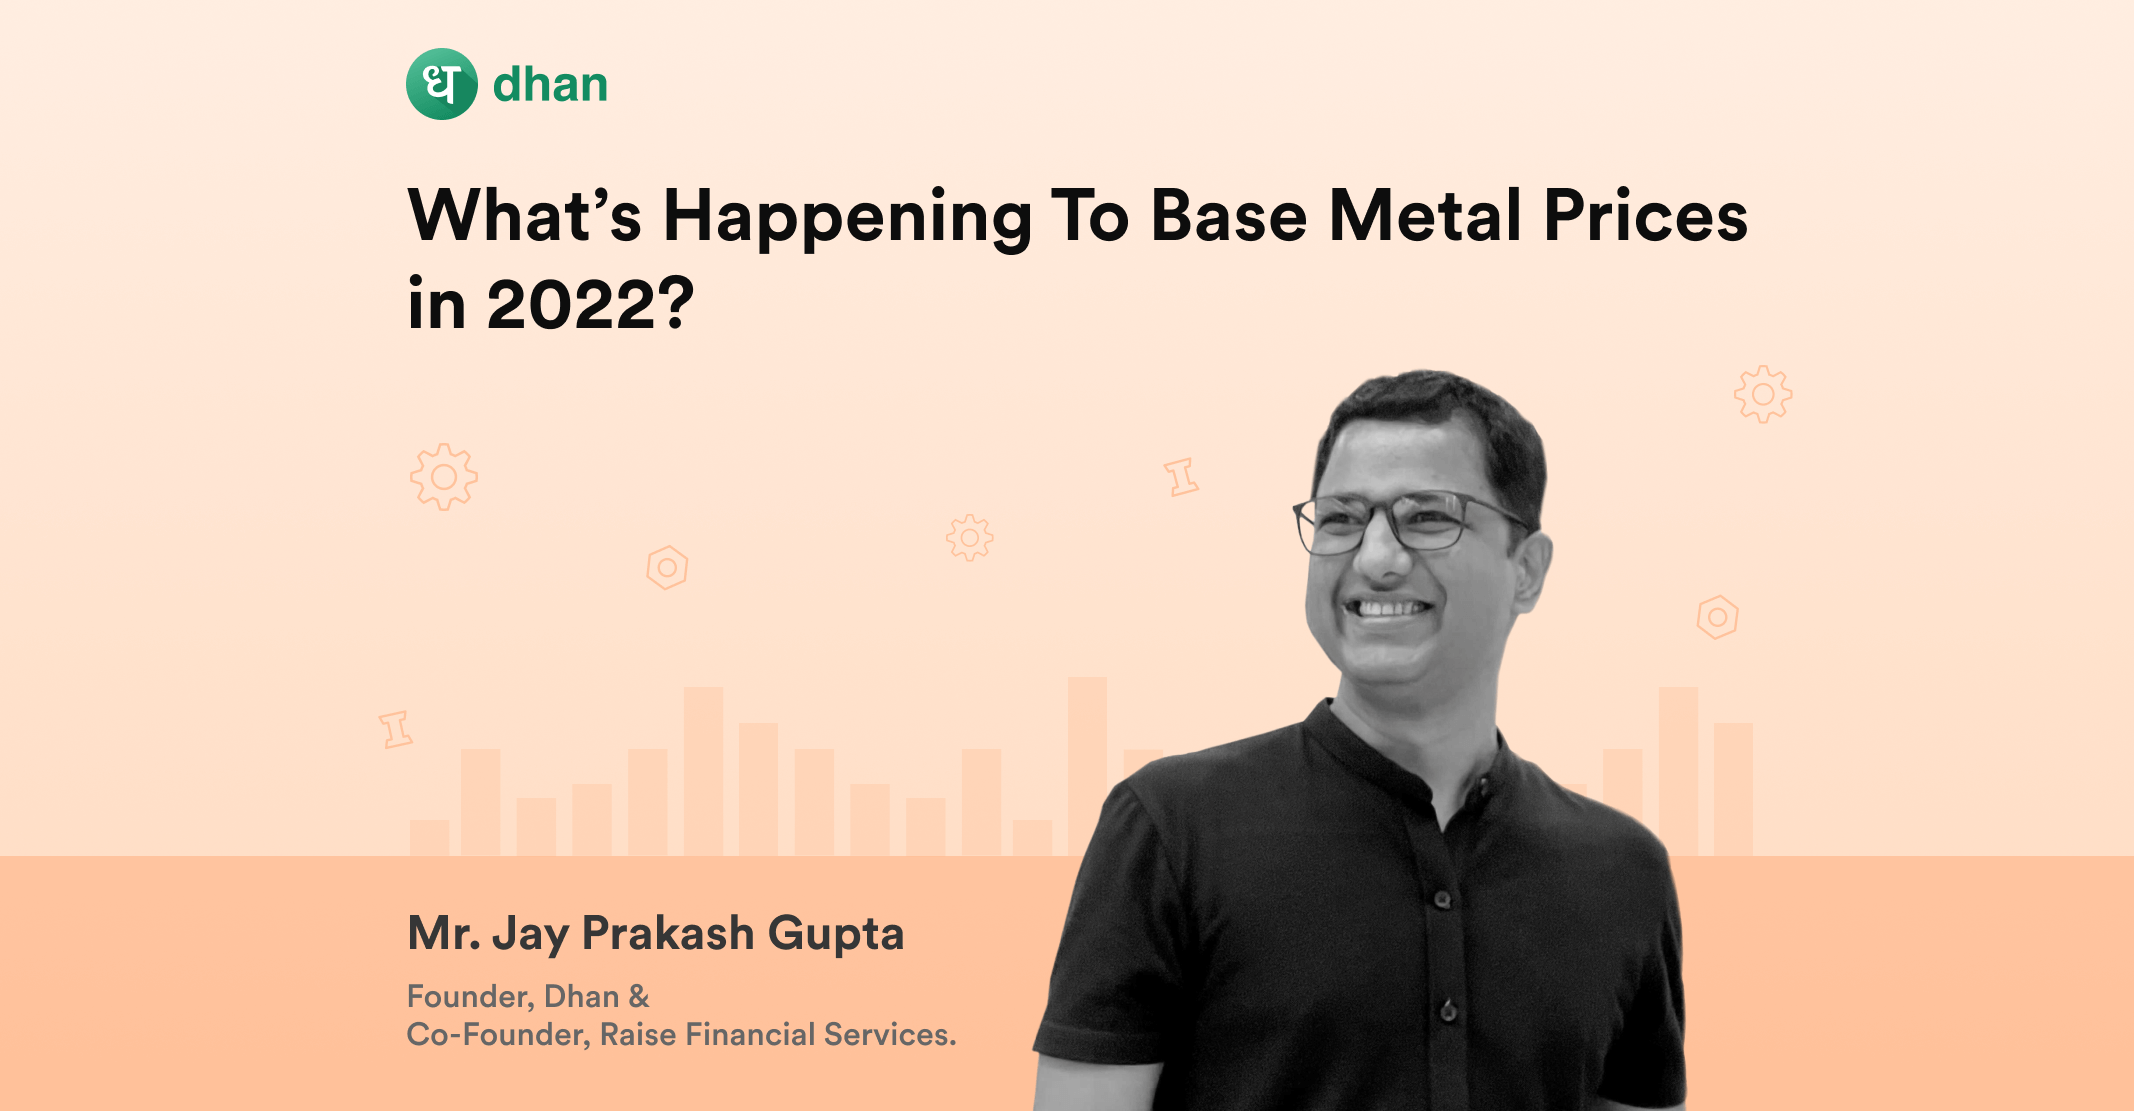 What’s Happening To Base Metal Prices in 2022